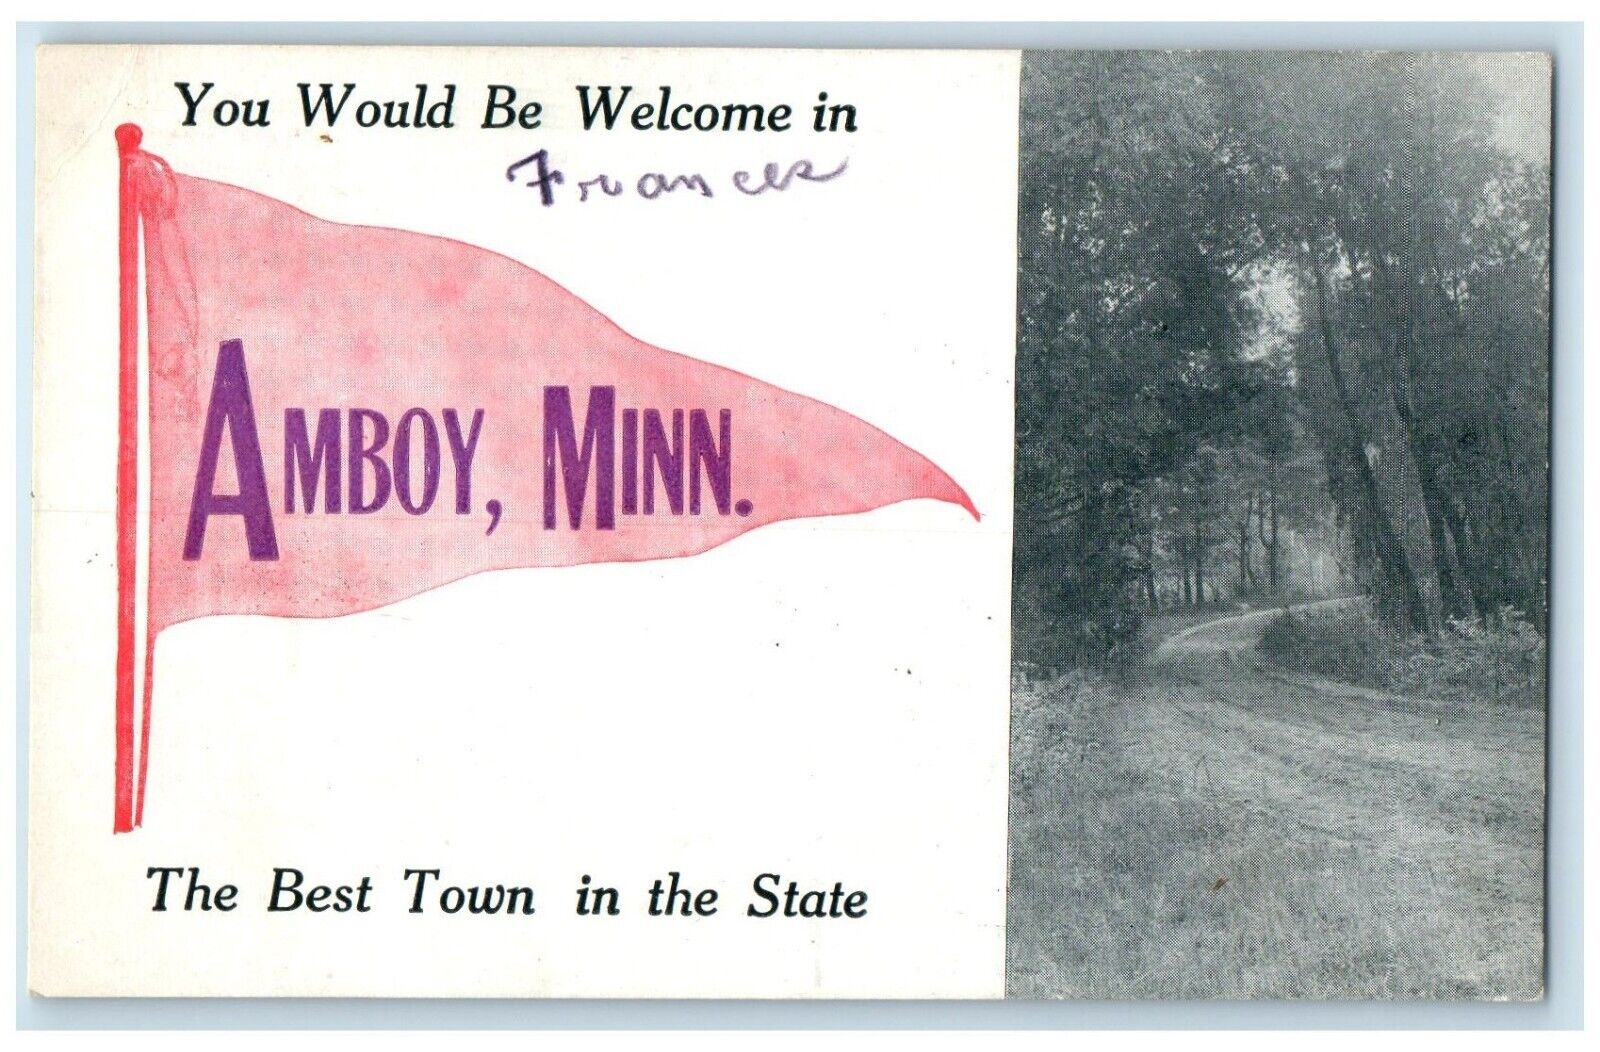 c1910 You Would Be Welcome Amboy Minnesota Town Pennant Vintage Antique Postcard